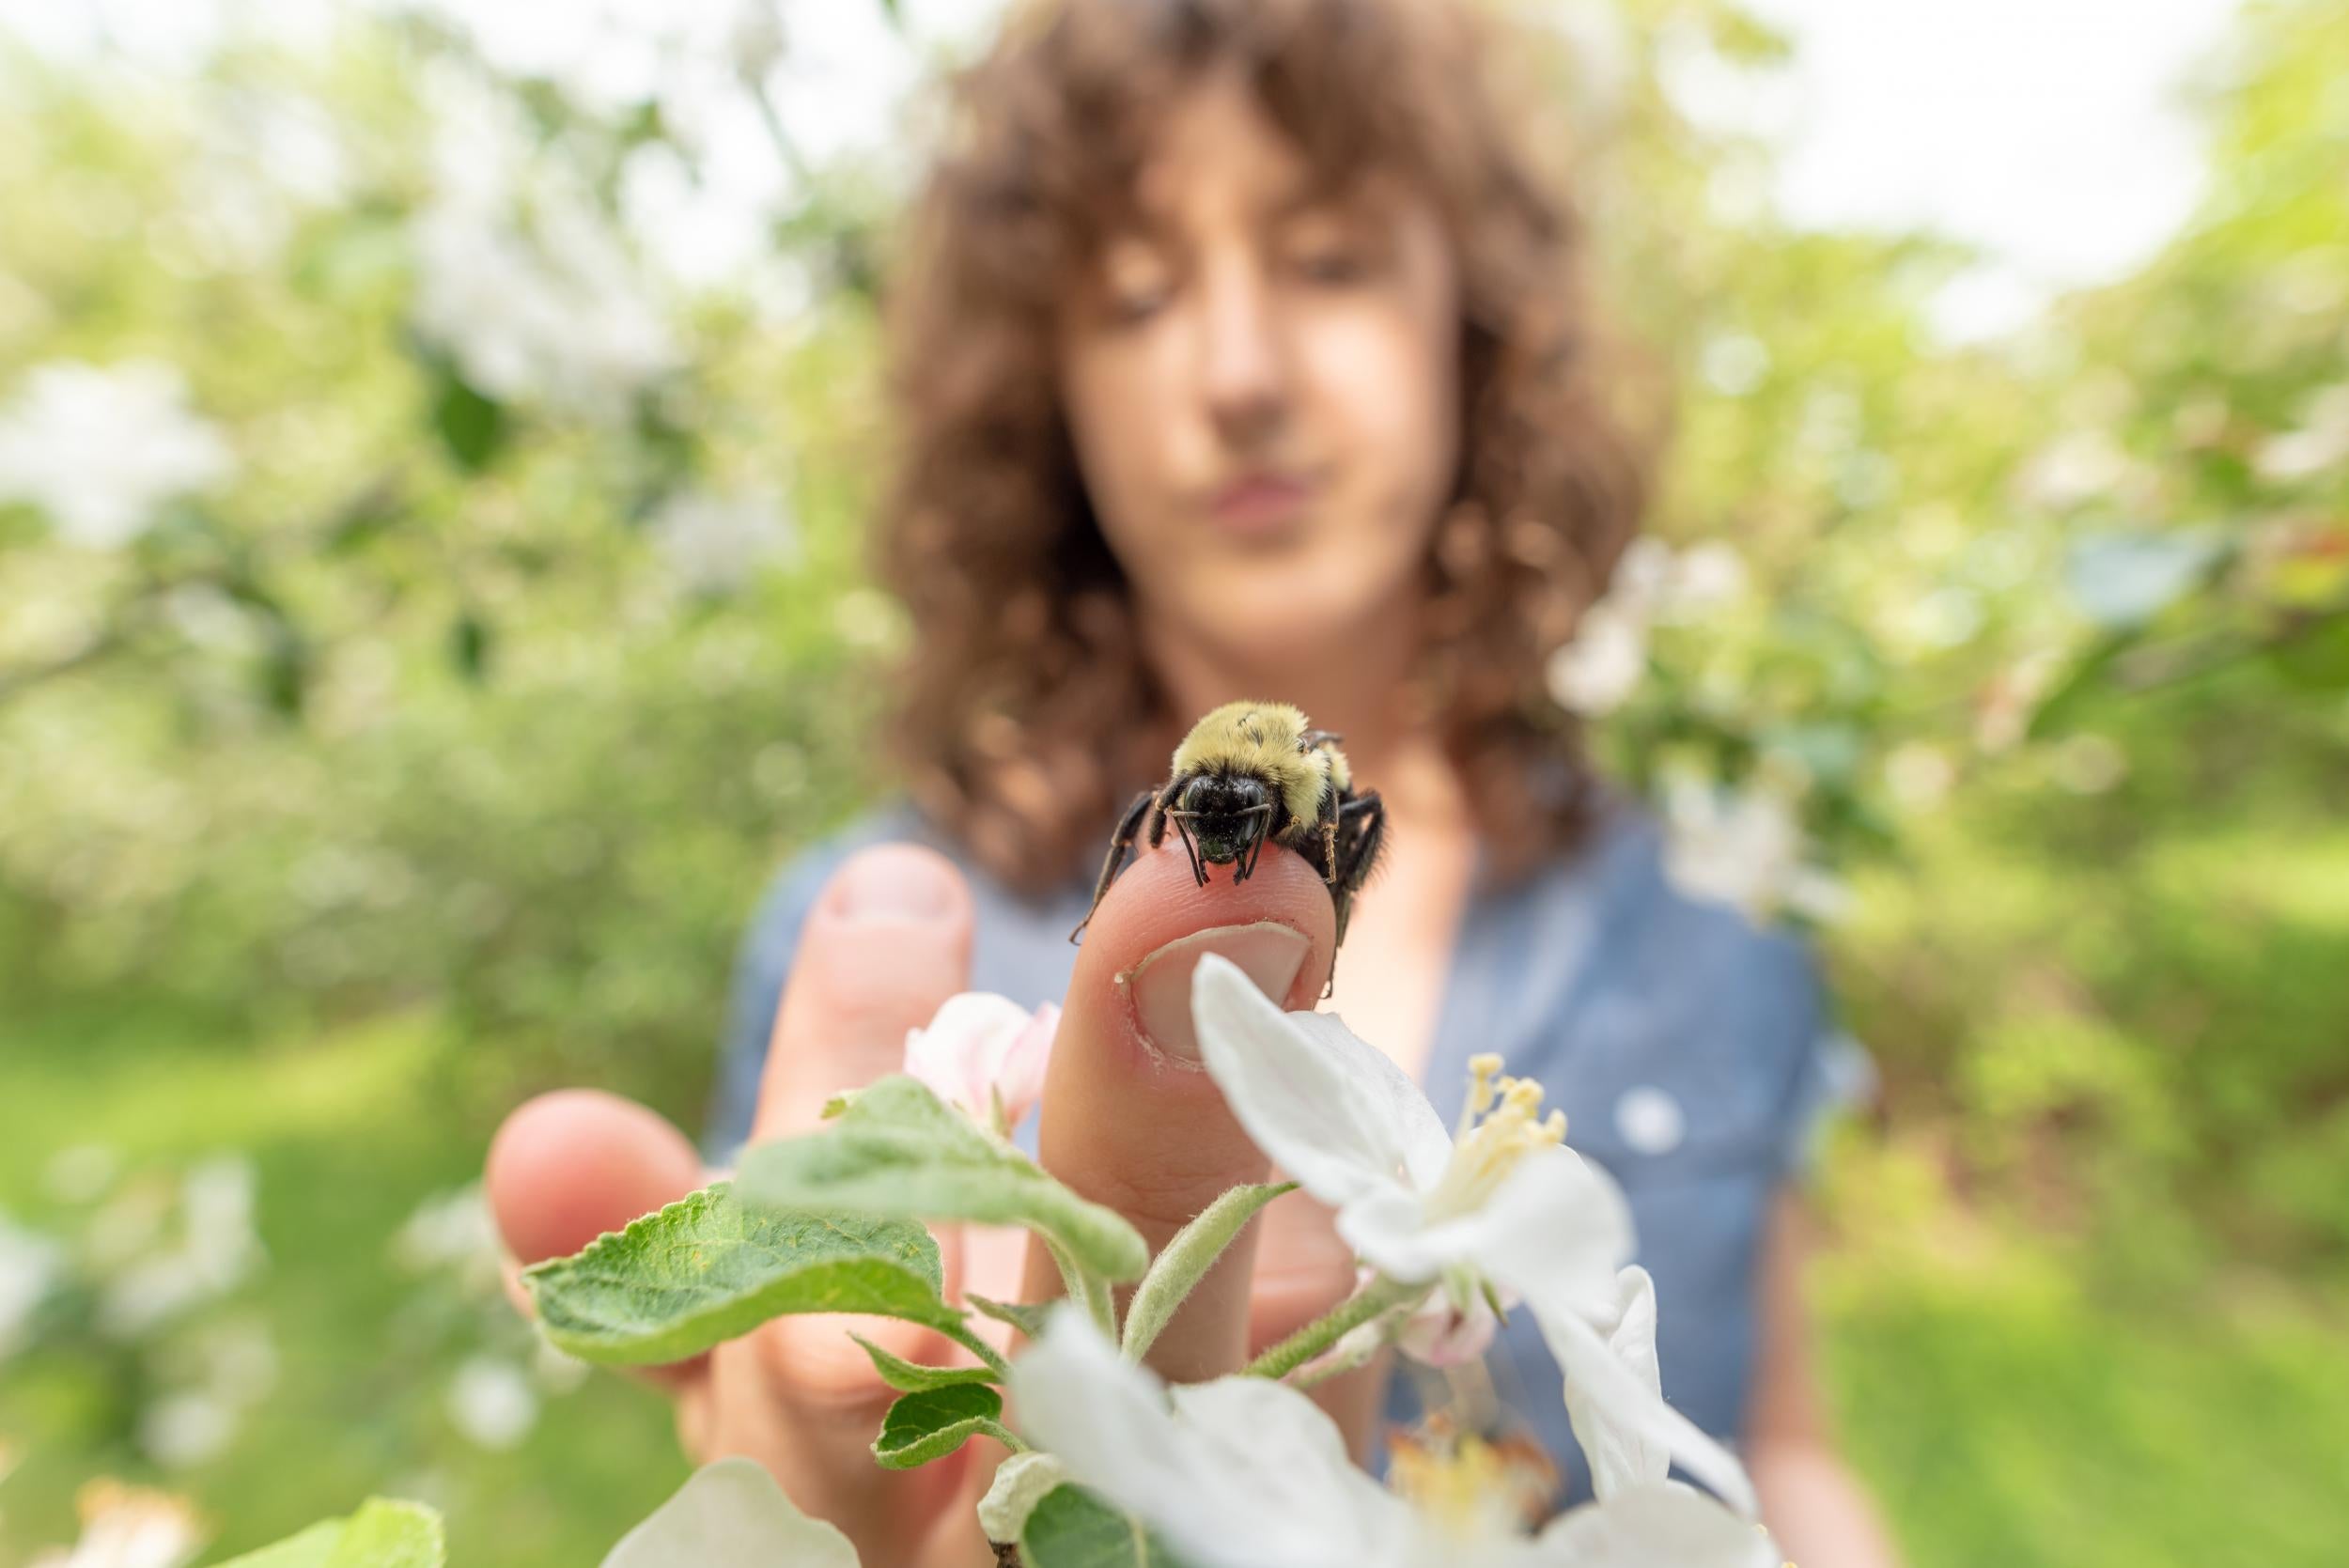 No bee viruses were found on flowers more than one kilometre from commercial sites. Pictured is lead researcher Samantha Alger